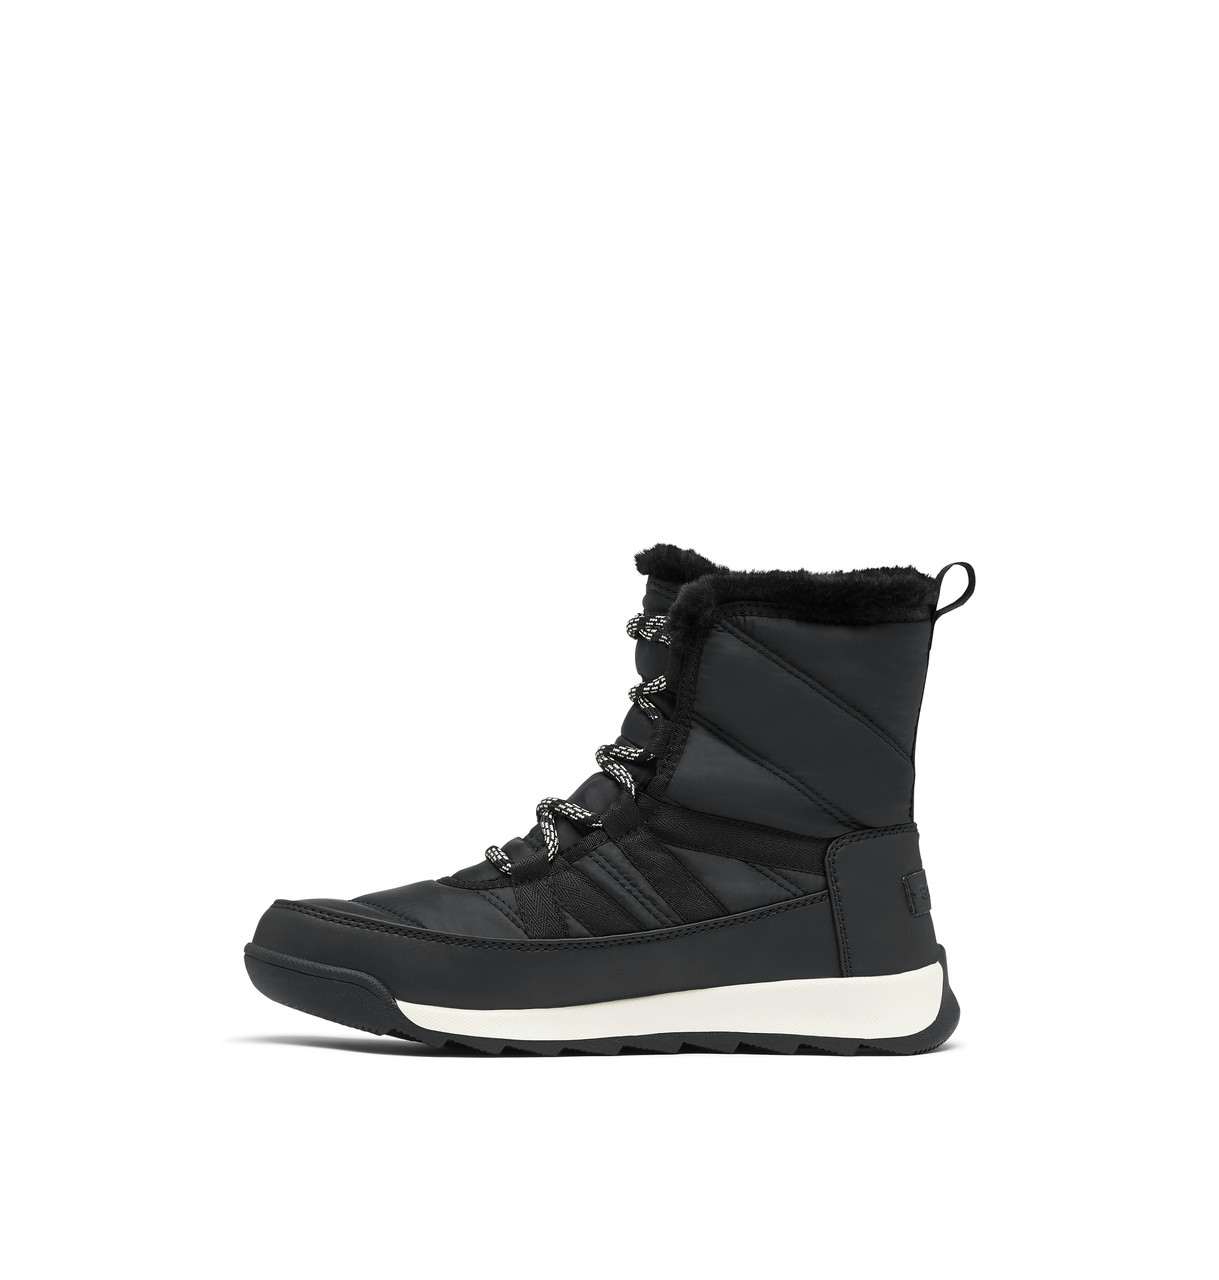 Whitney II Short Lace Winter Boots Black